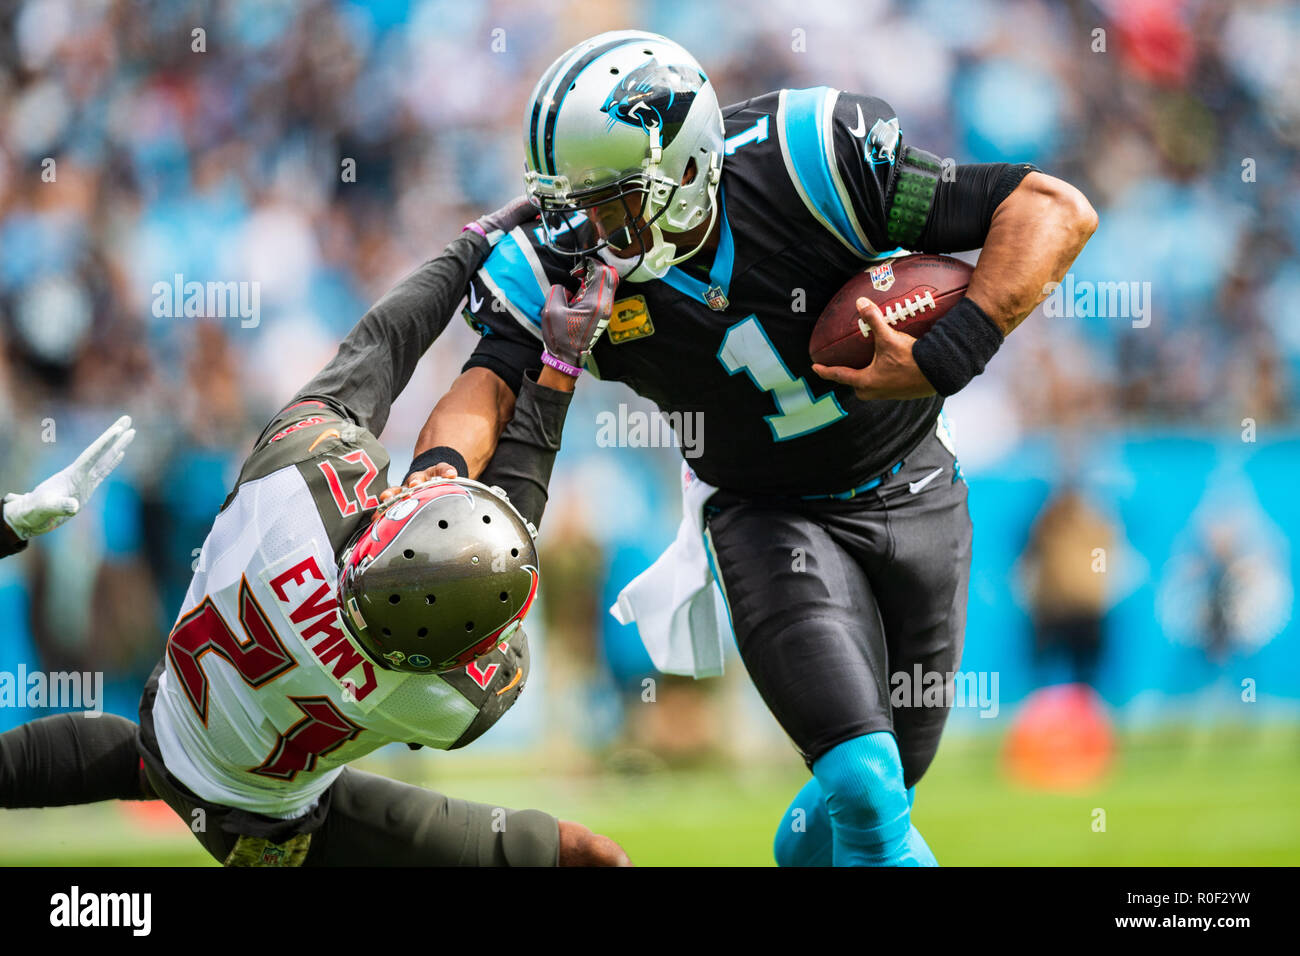 Carolina Panthers quarterback Cam Newton (1) Tampa Bay Buccaneers strong safety Justin Evans (21) during the NFL football game between the Tampa Bay Buccaneers and the Carolina Panthers on Sunday November 4, 2018 in Charlotte, NC. Jacob Kupferman/CSM Stock Photo